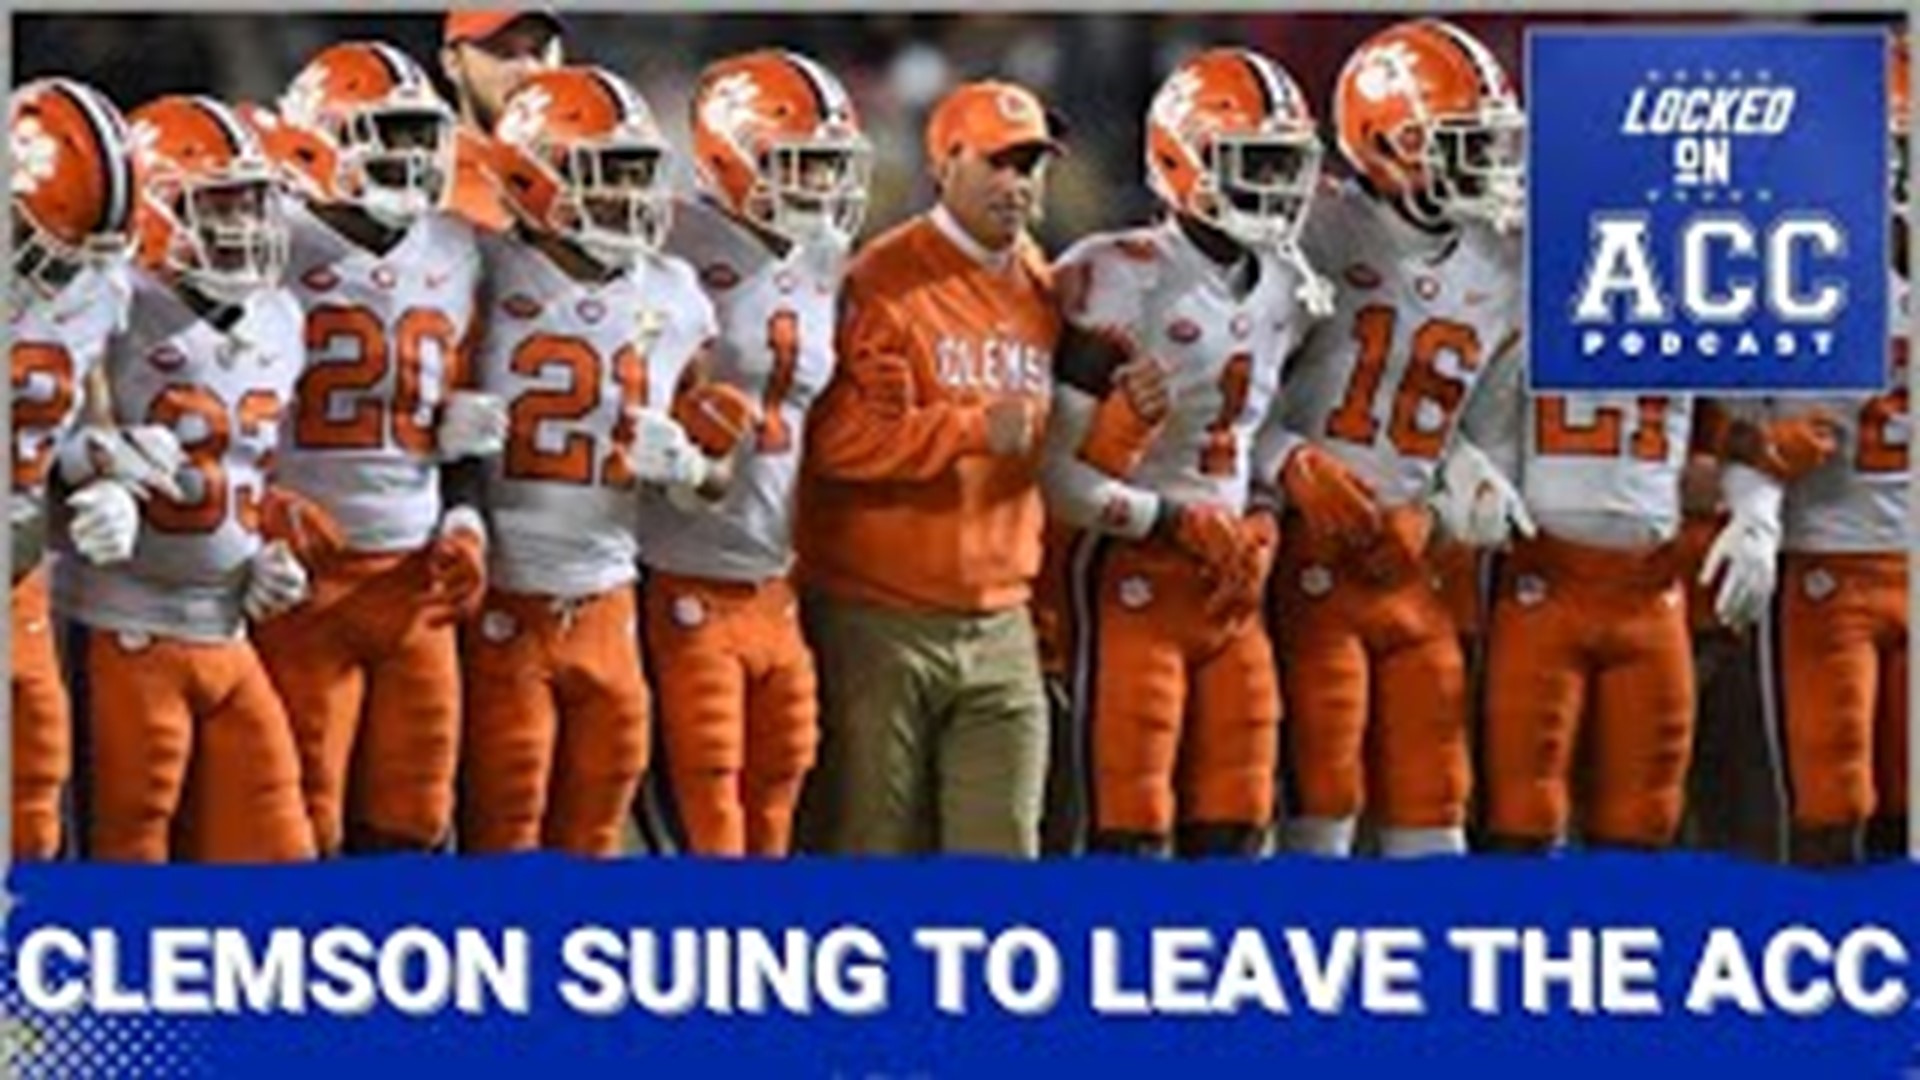 Clemson Tigers follow FSU's lead in suing the ACC to exit the conference.